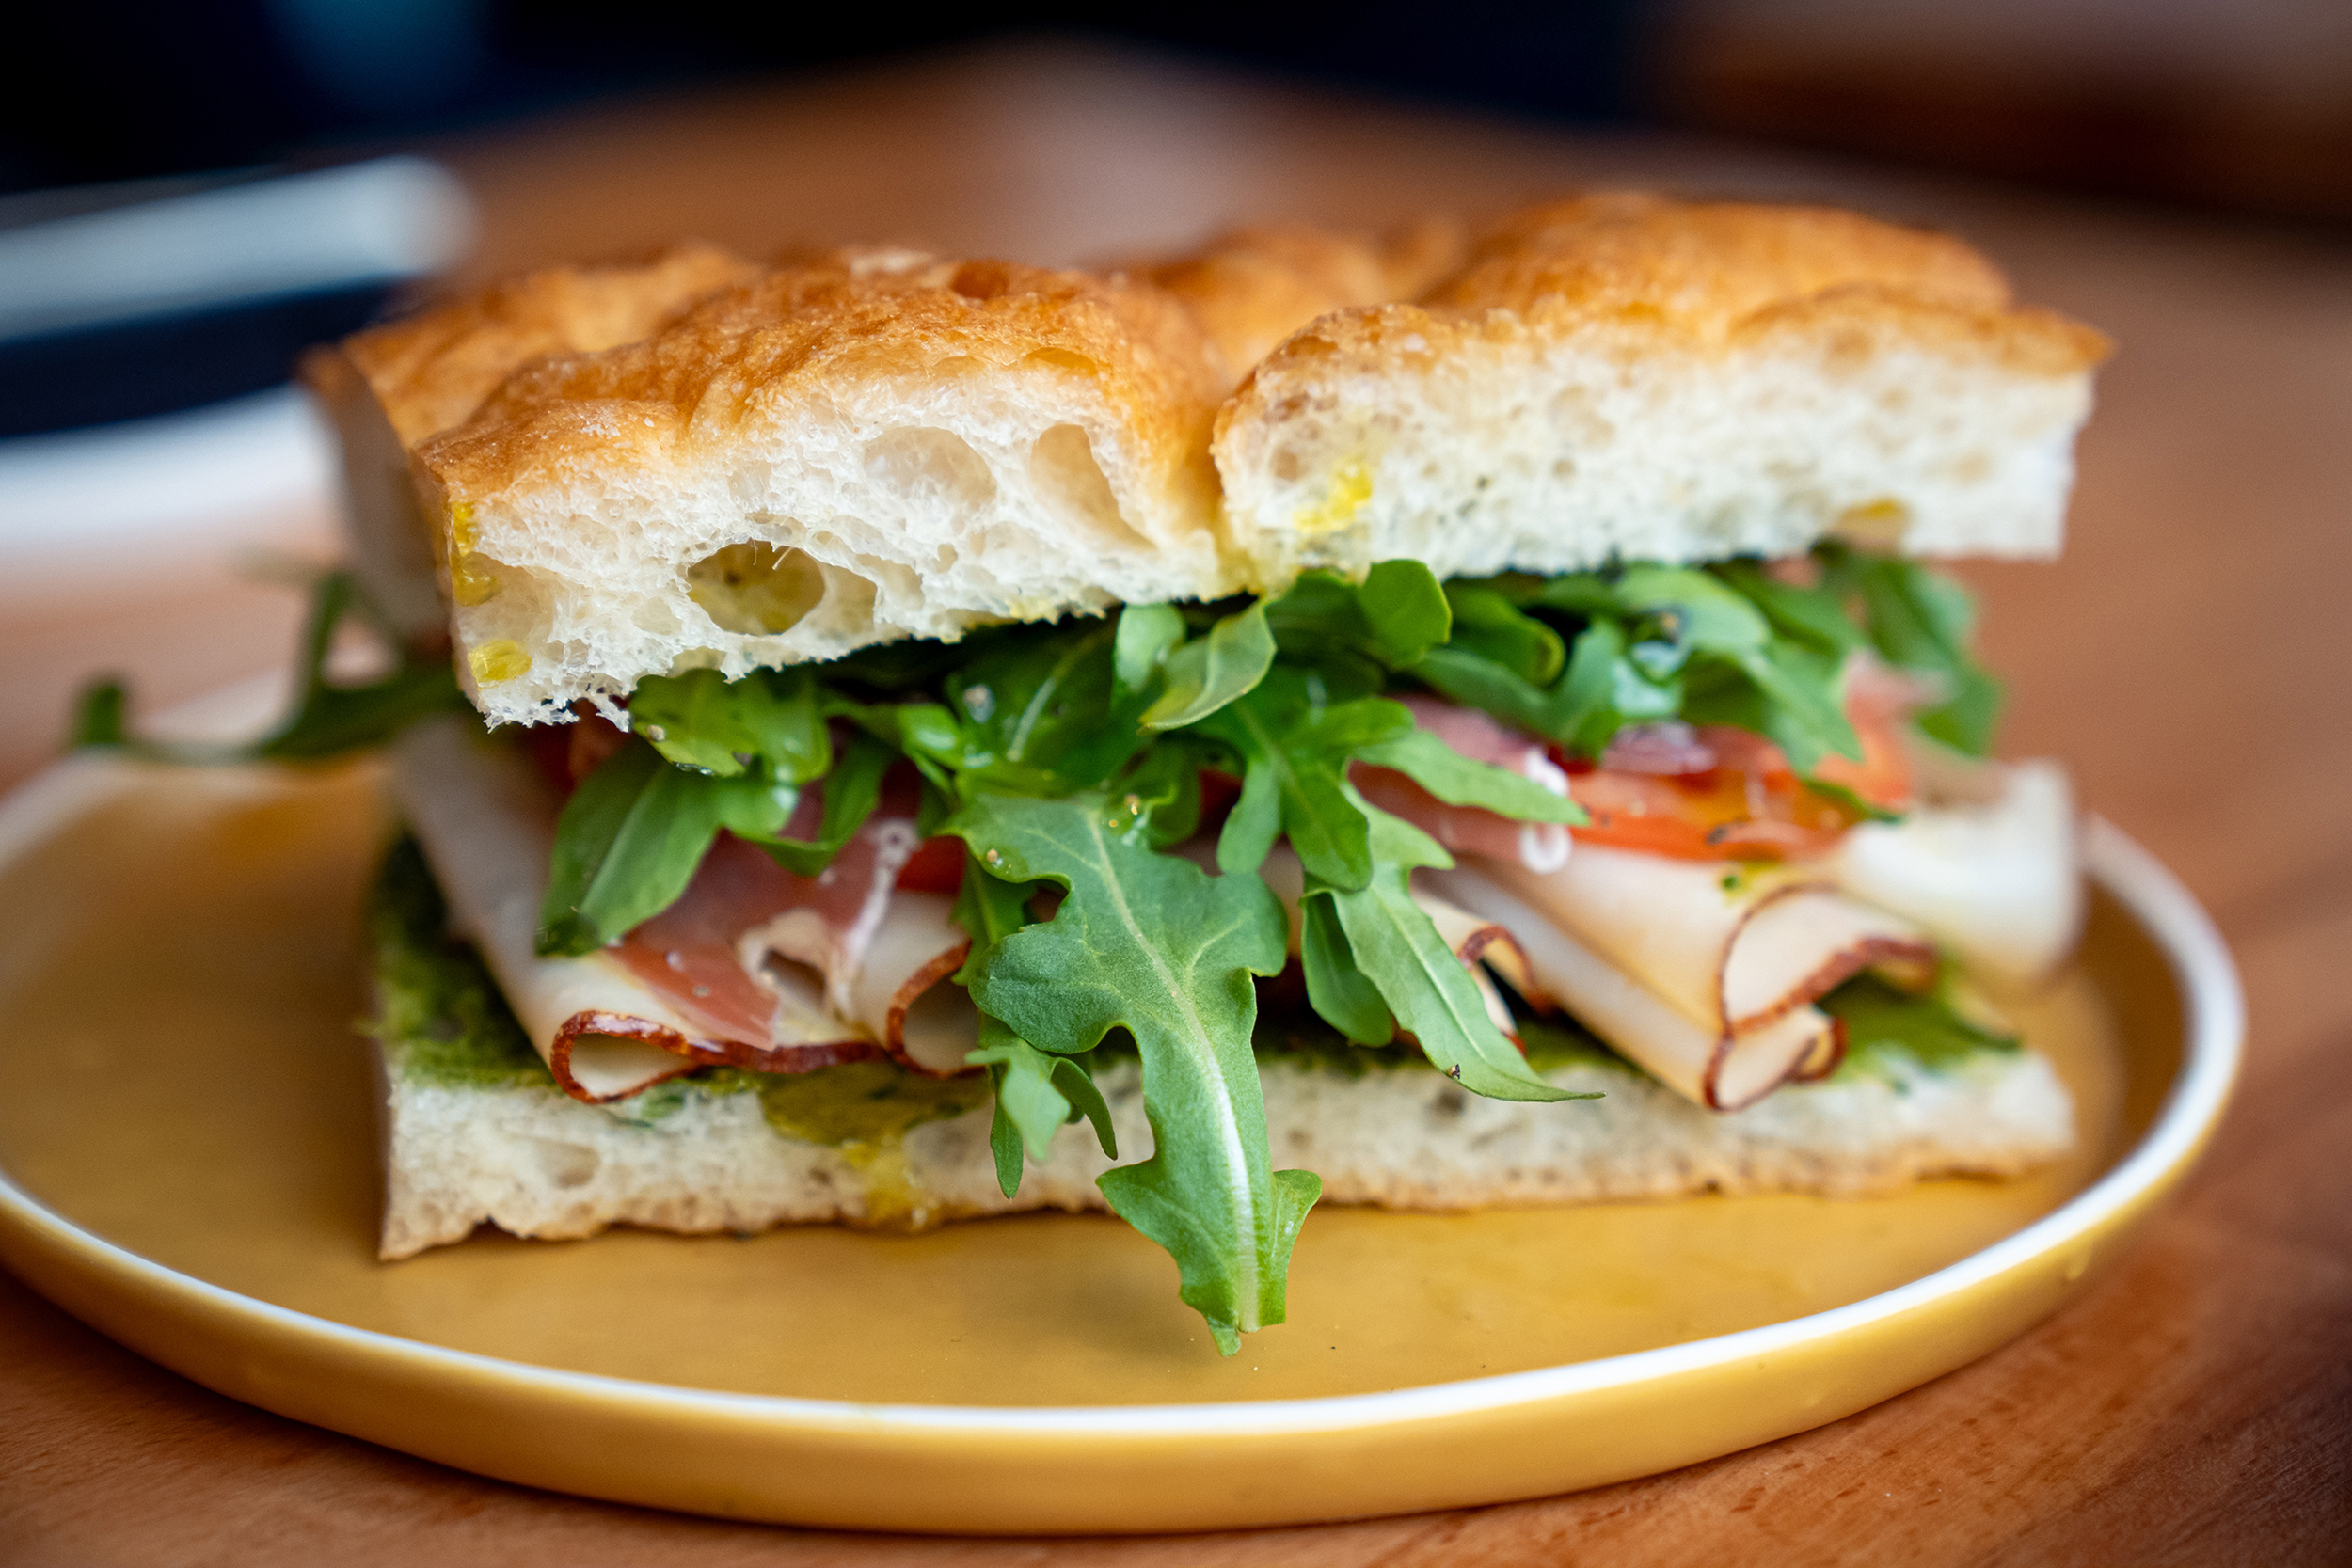 A close-up photo of a sandwich sitting on a yellow plate on a wood table. The sandwich has focaccia bread, arugula, tomato, prosciutto, turkey, and pesto.